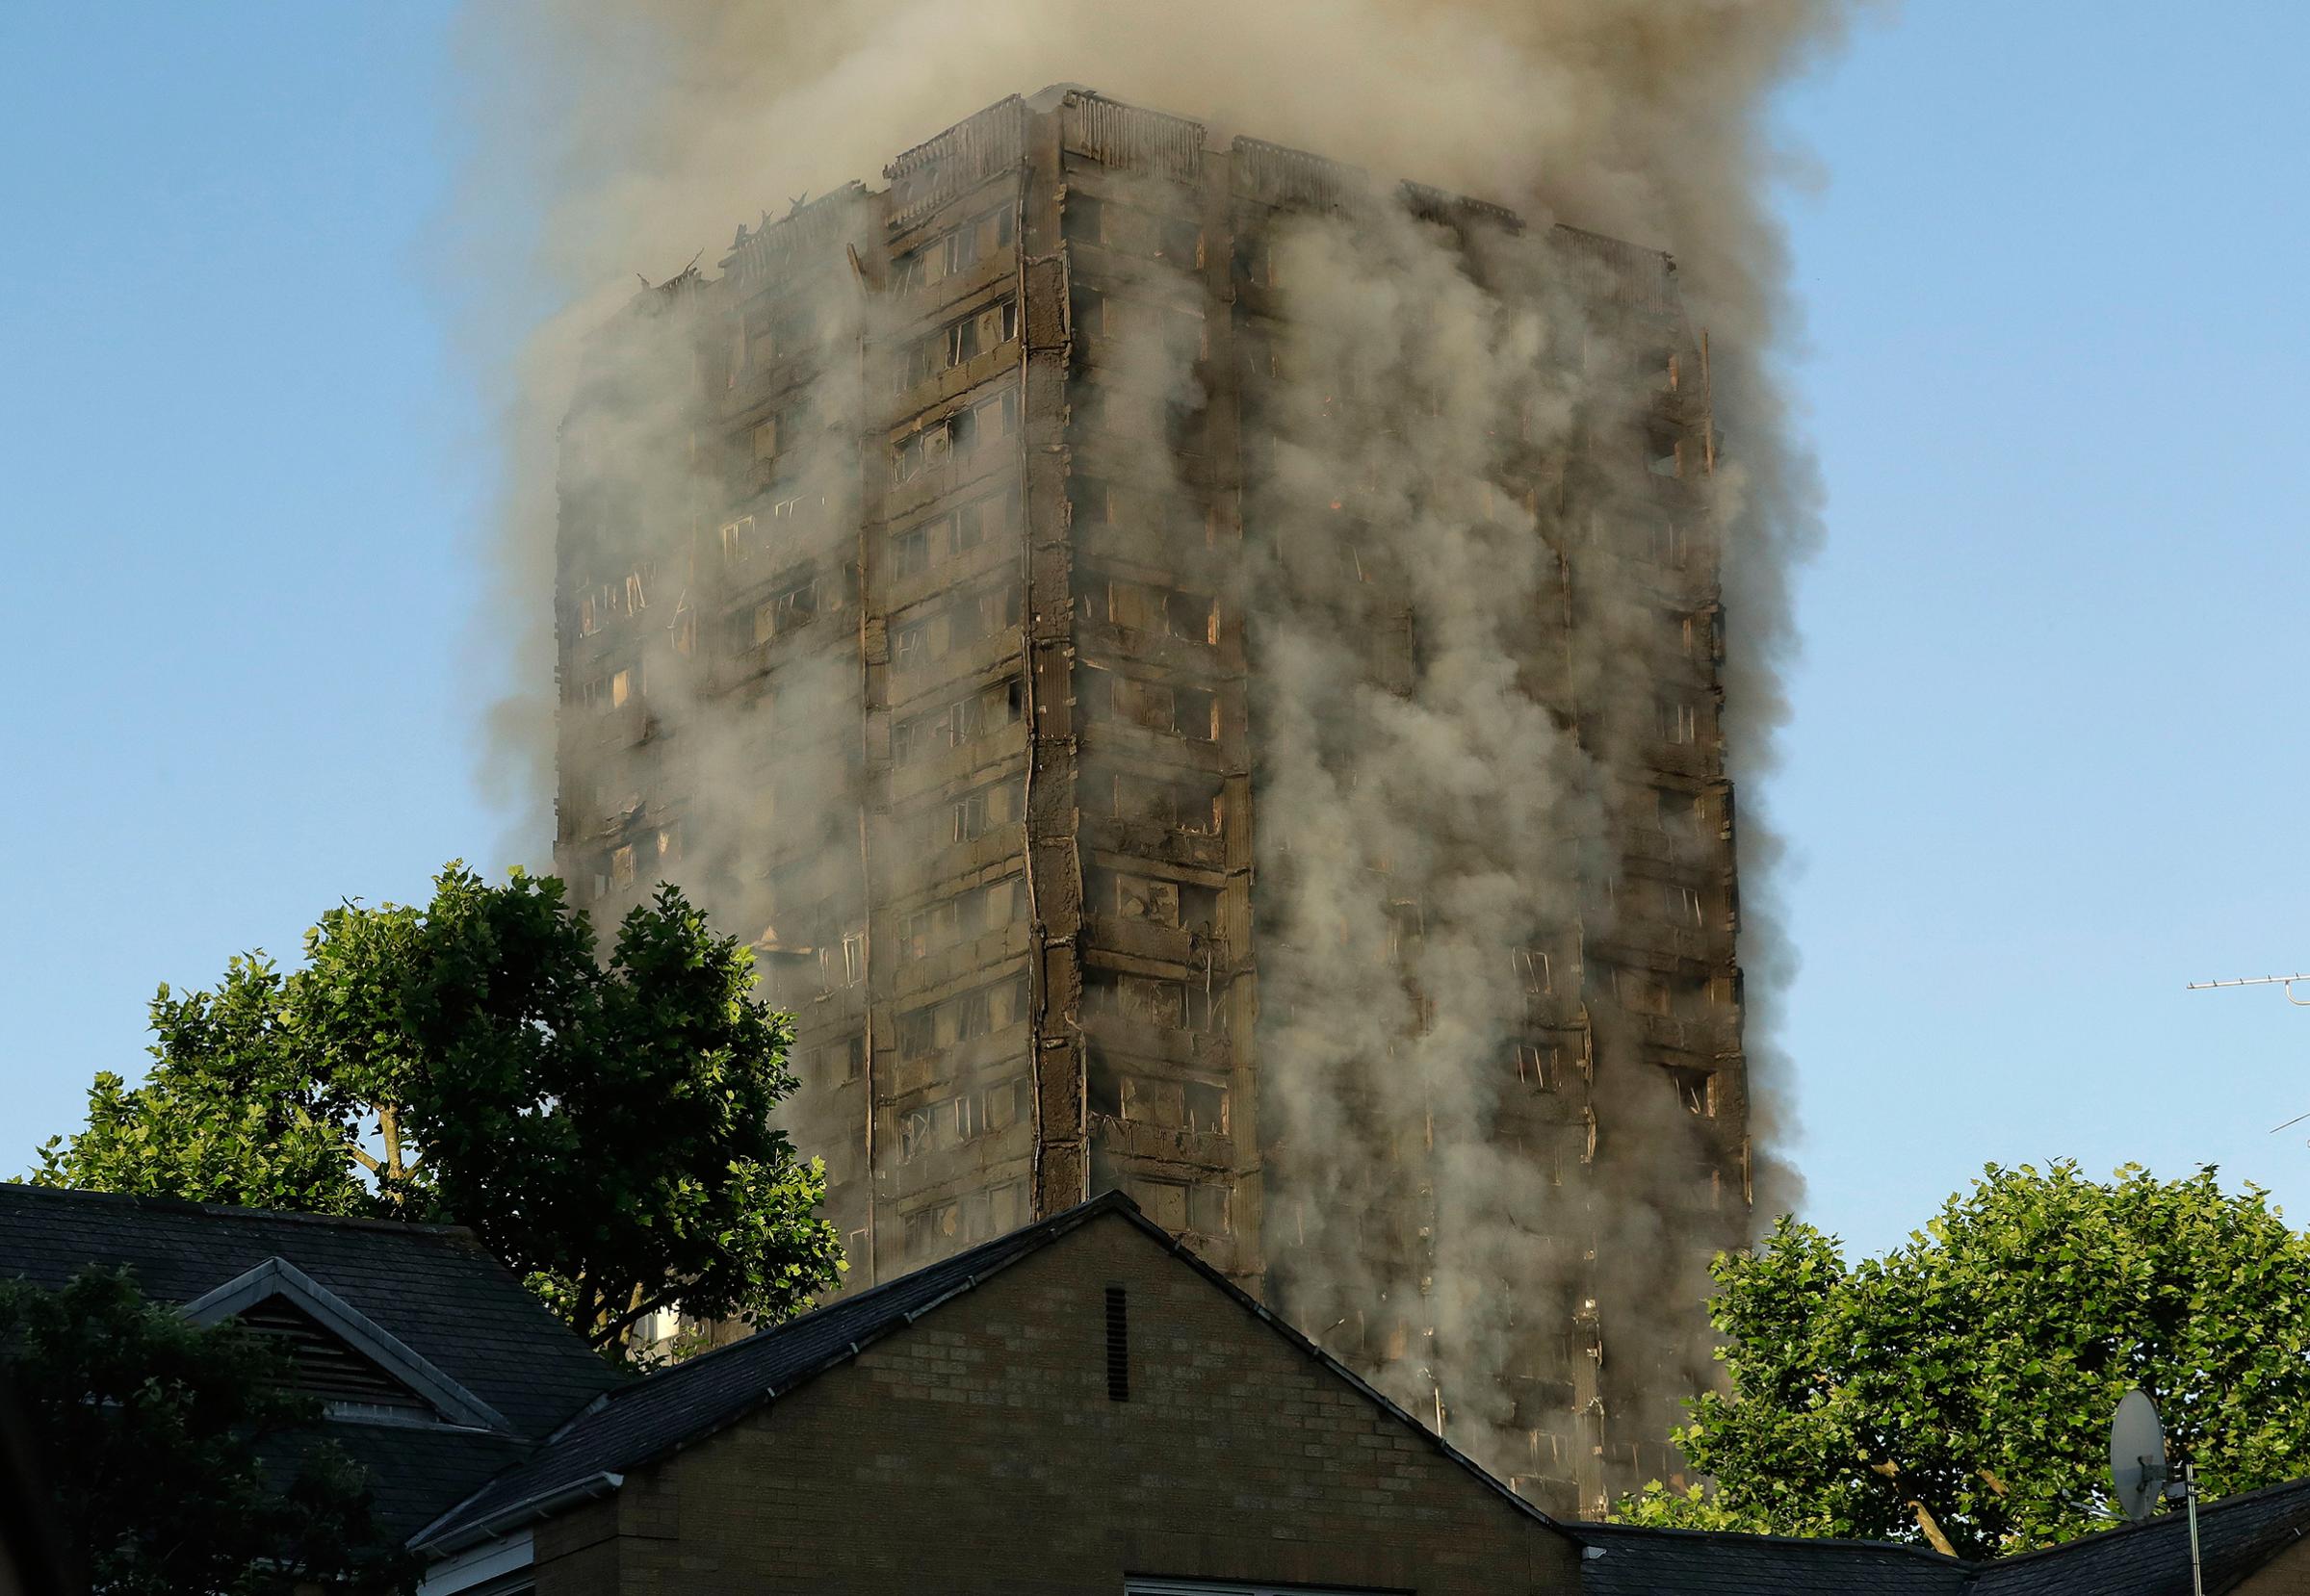 Smoke rises from a high-rise building that caught fire overnight in West London on June 14, 2017.